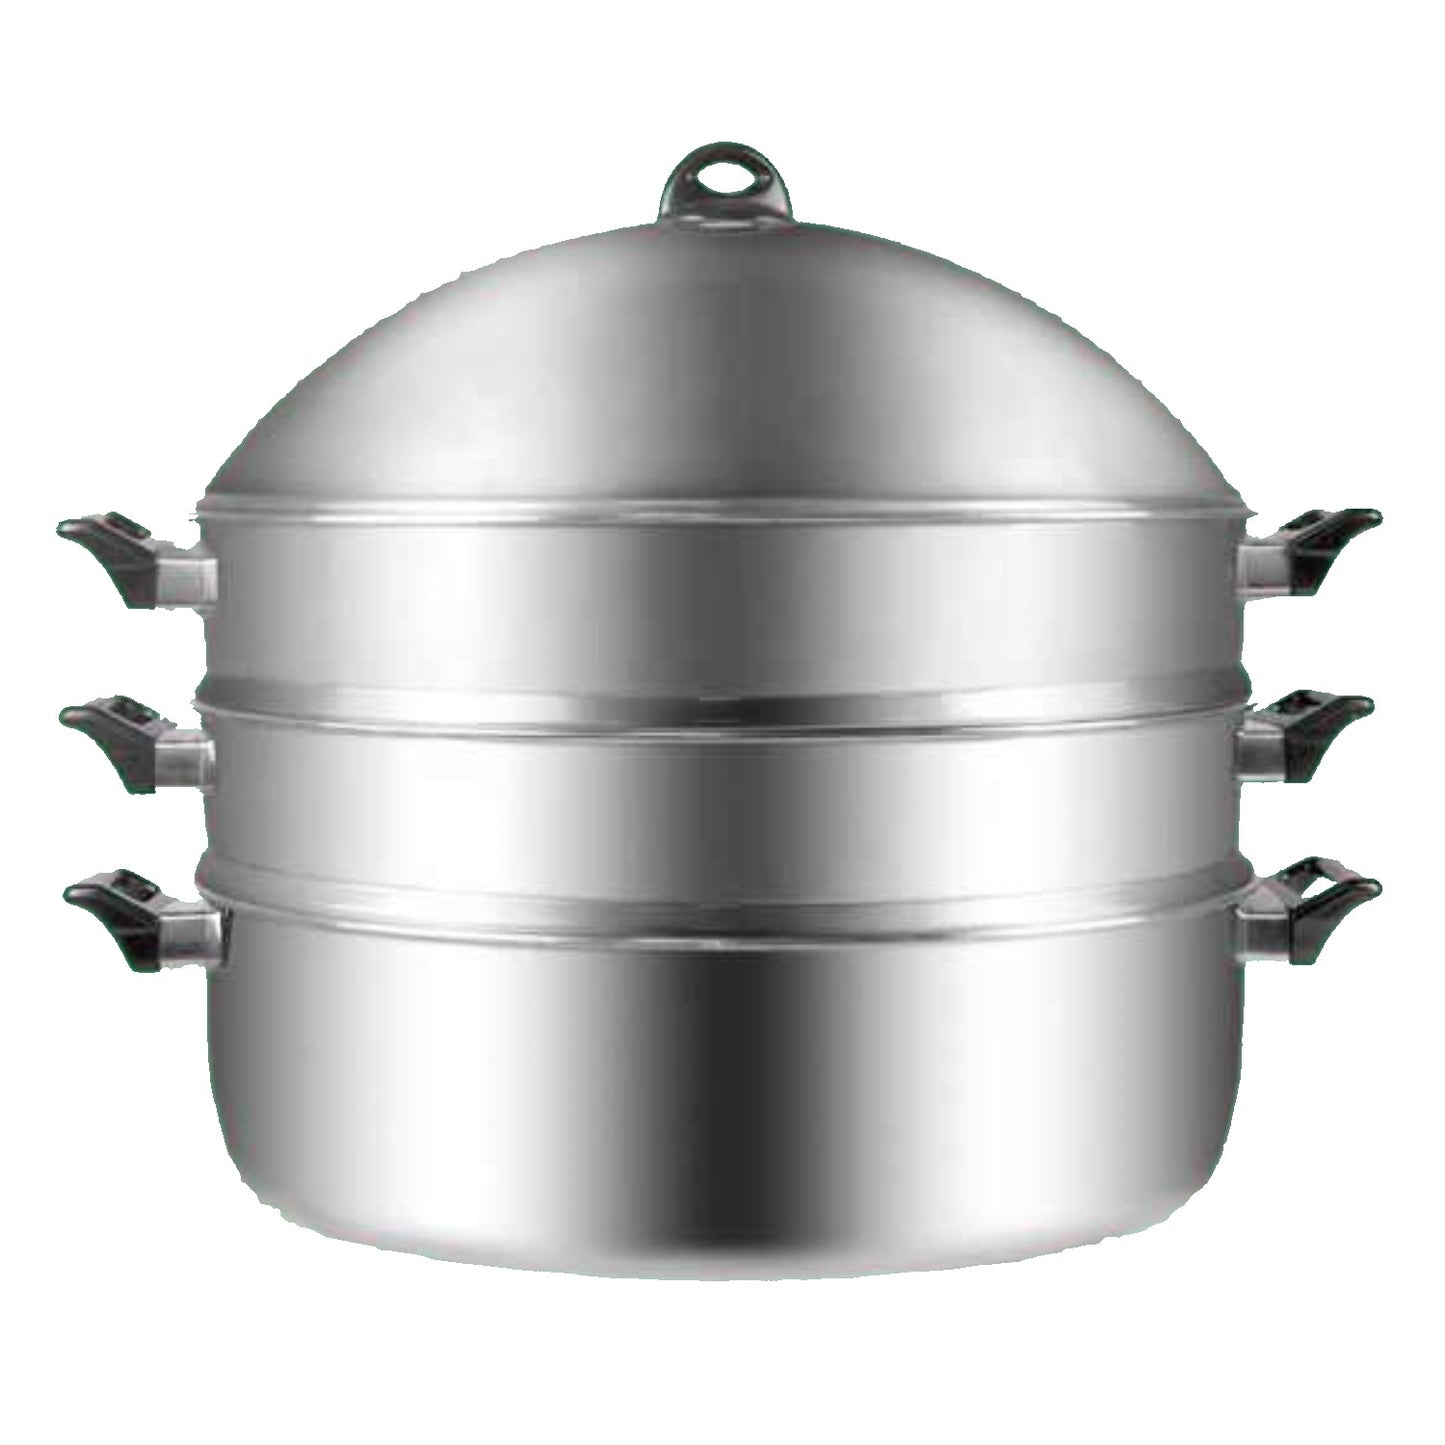 40cm Stainless Steel 3 Tier Layer Steamer With High Lid Dome